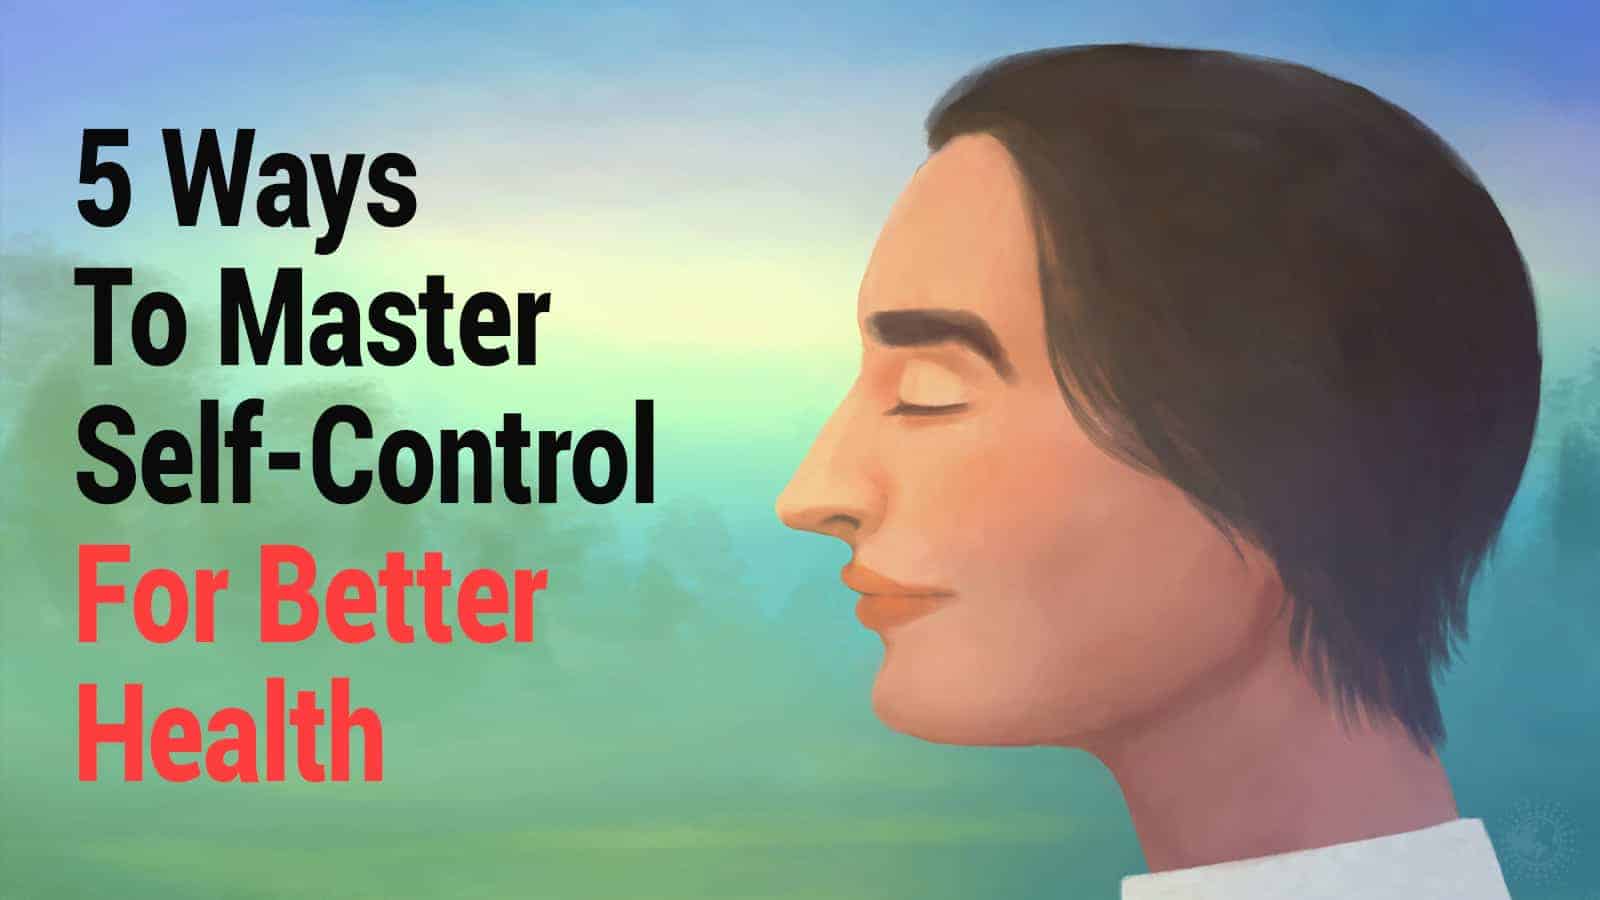 5 Ways To Master Self-Control For Better Health